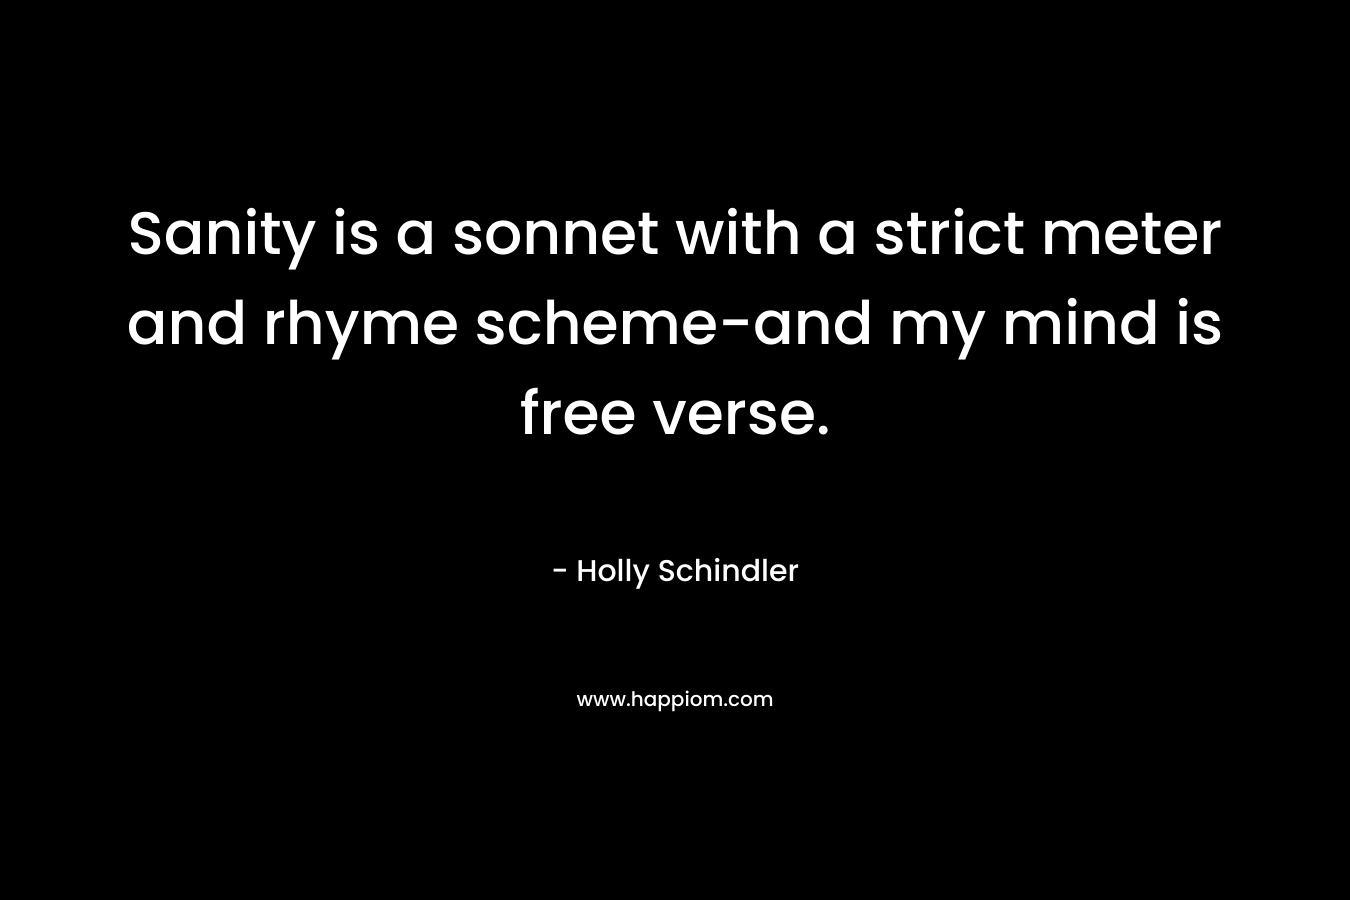 Sanity is a sonnet with a strict meter and rhyme scheme-and my mind is free verse. – Holly Schindler